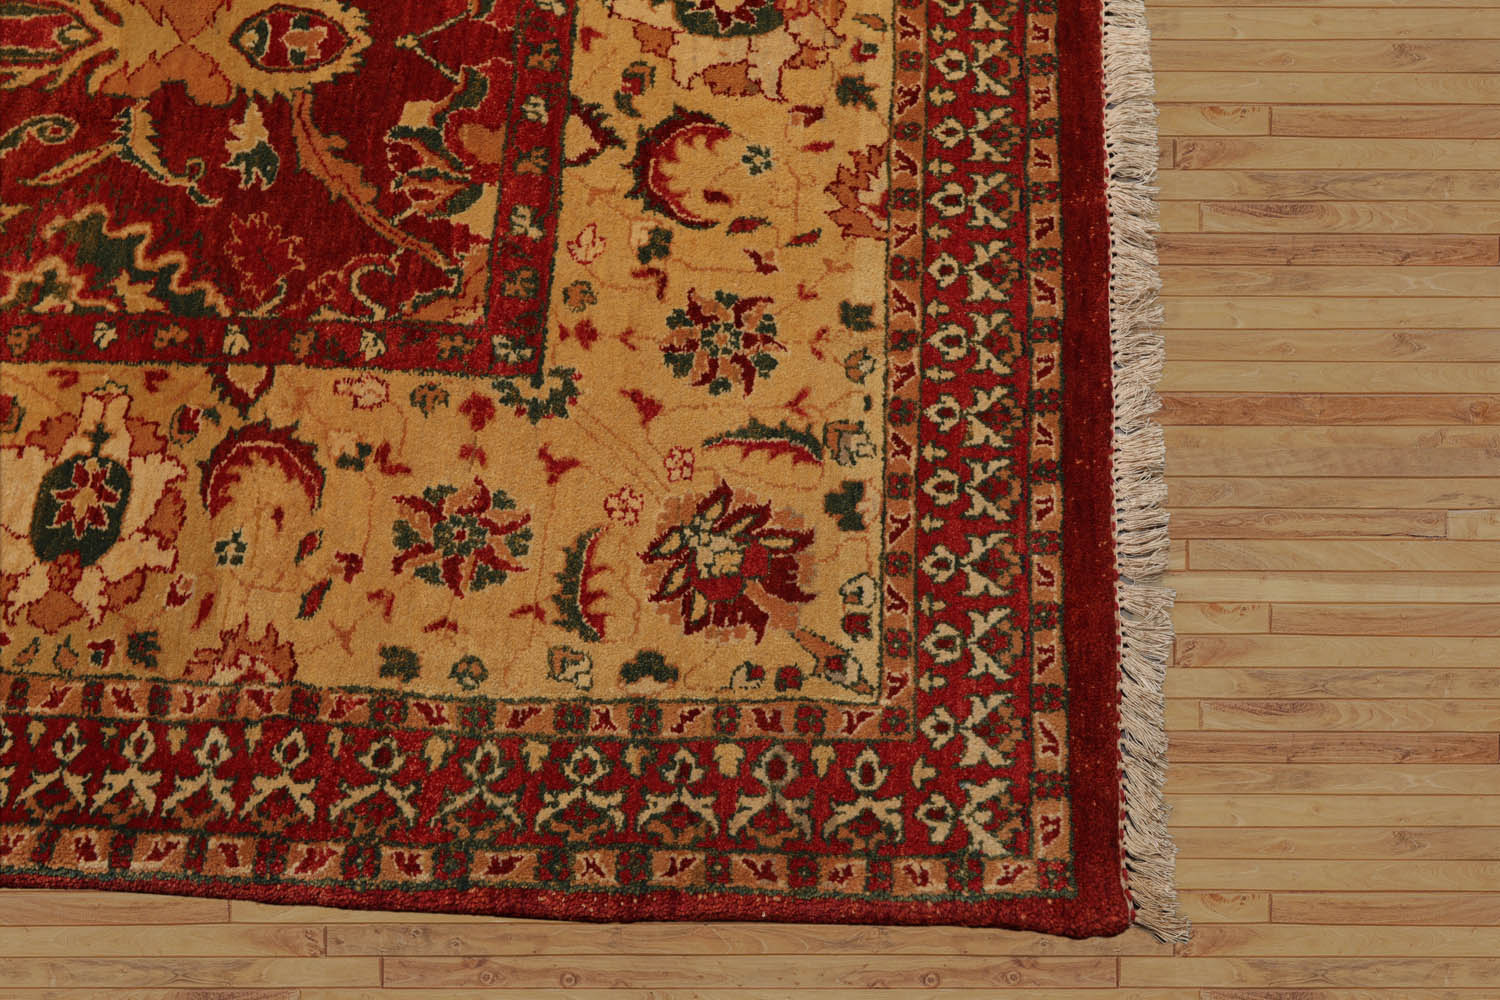 Brizeida 9x12 Hand Knotted Arts & Crafts 100% Wool Michaelian & Kohlberg Arts & Crafts Oriental Area Rug Rusty Red, Gold Color